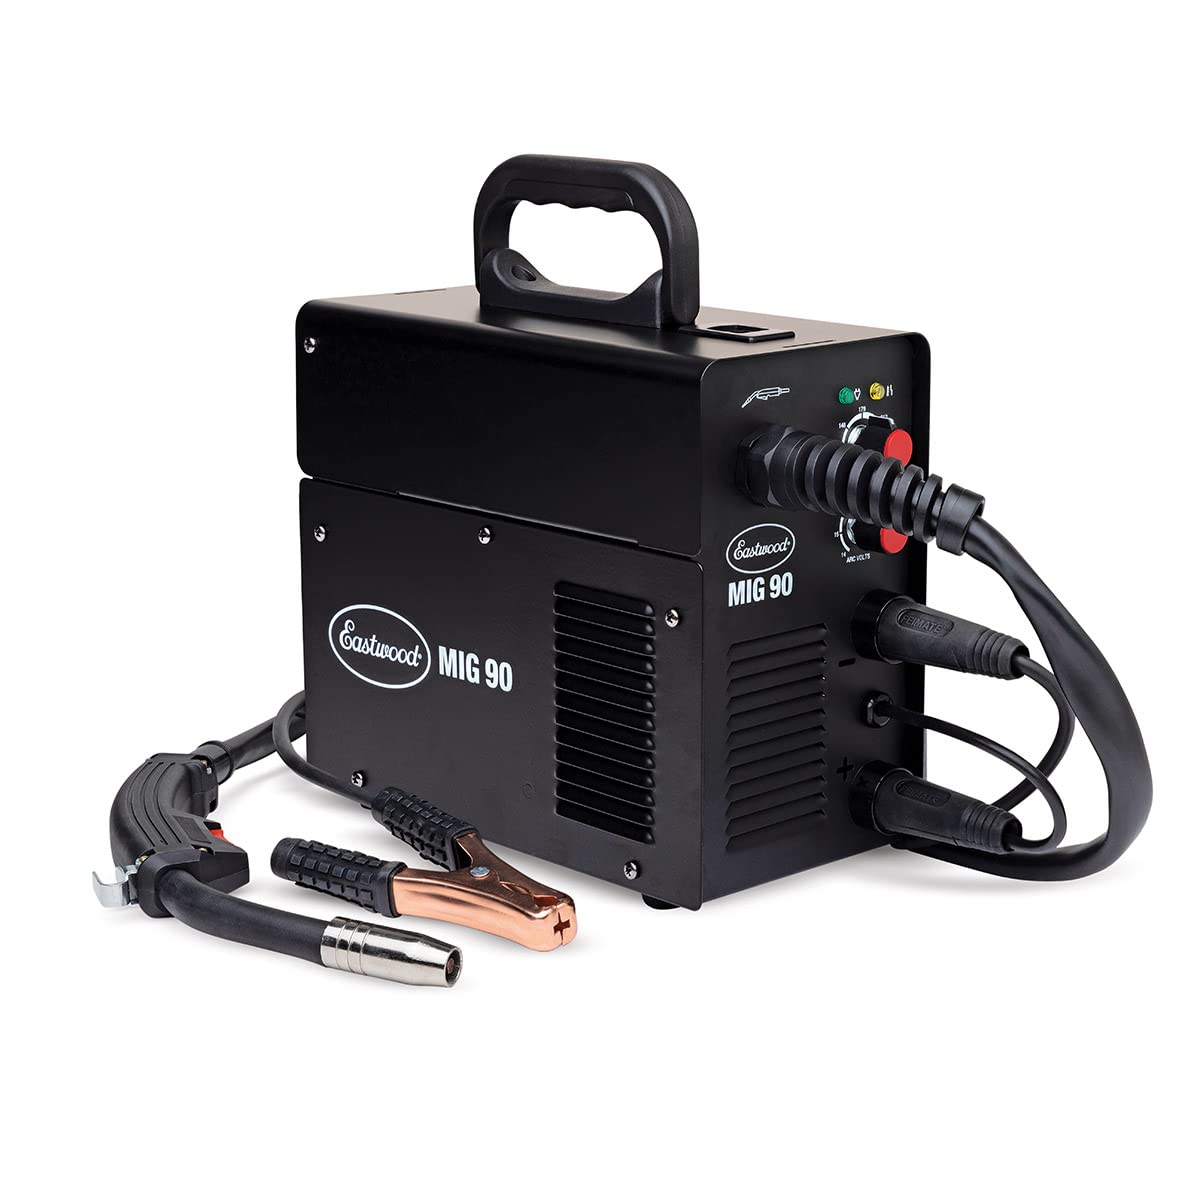 Eastwood 30-90 Amp 120V MIG Welder Machine for MIG and Flux Welding | Portable Welding Machine with Gas Regulator and Spool of Wire | Perfect for Beginners and DIY Project Enthusiast